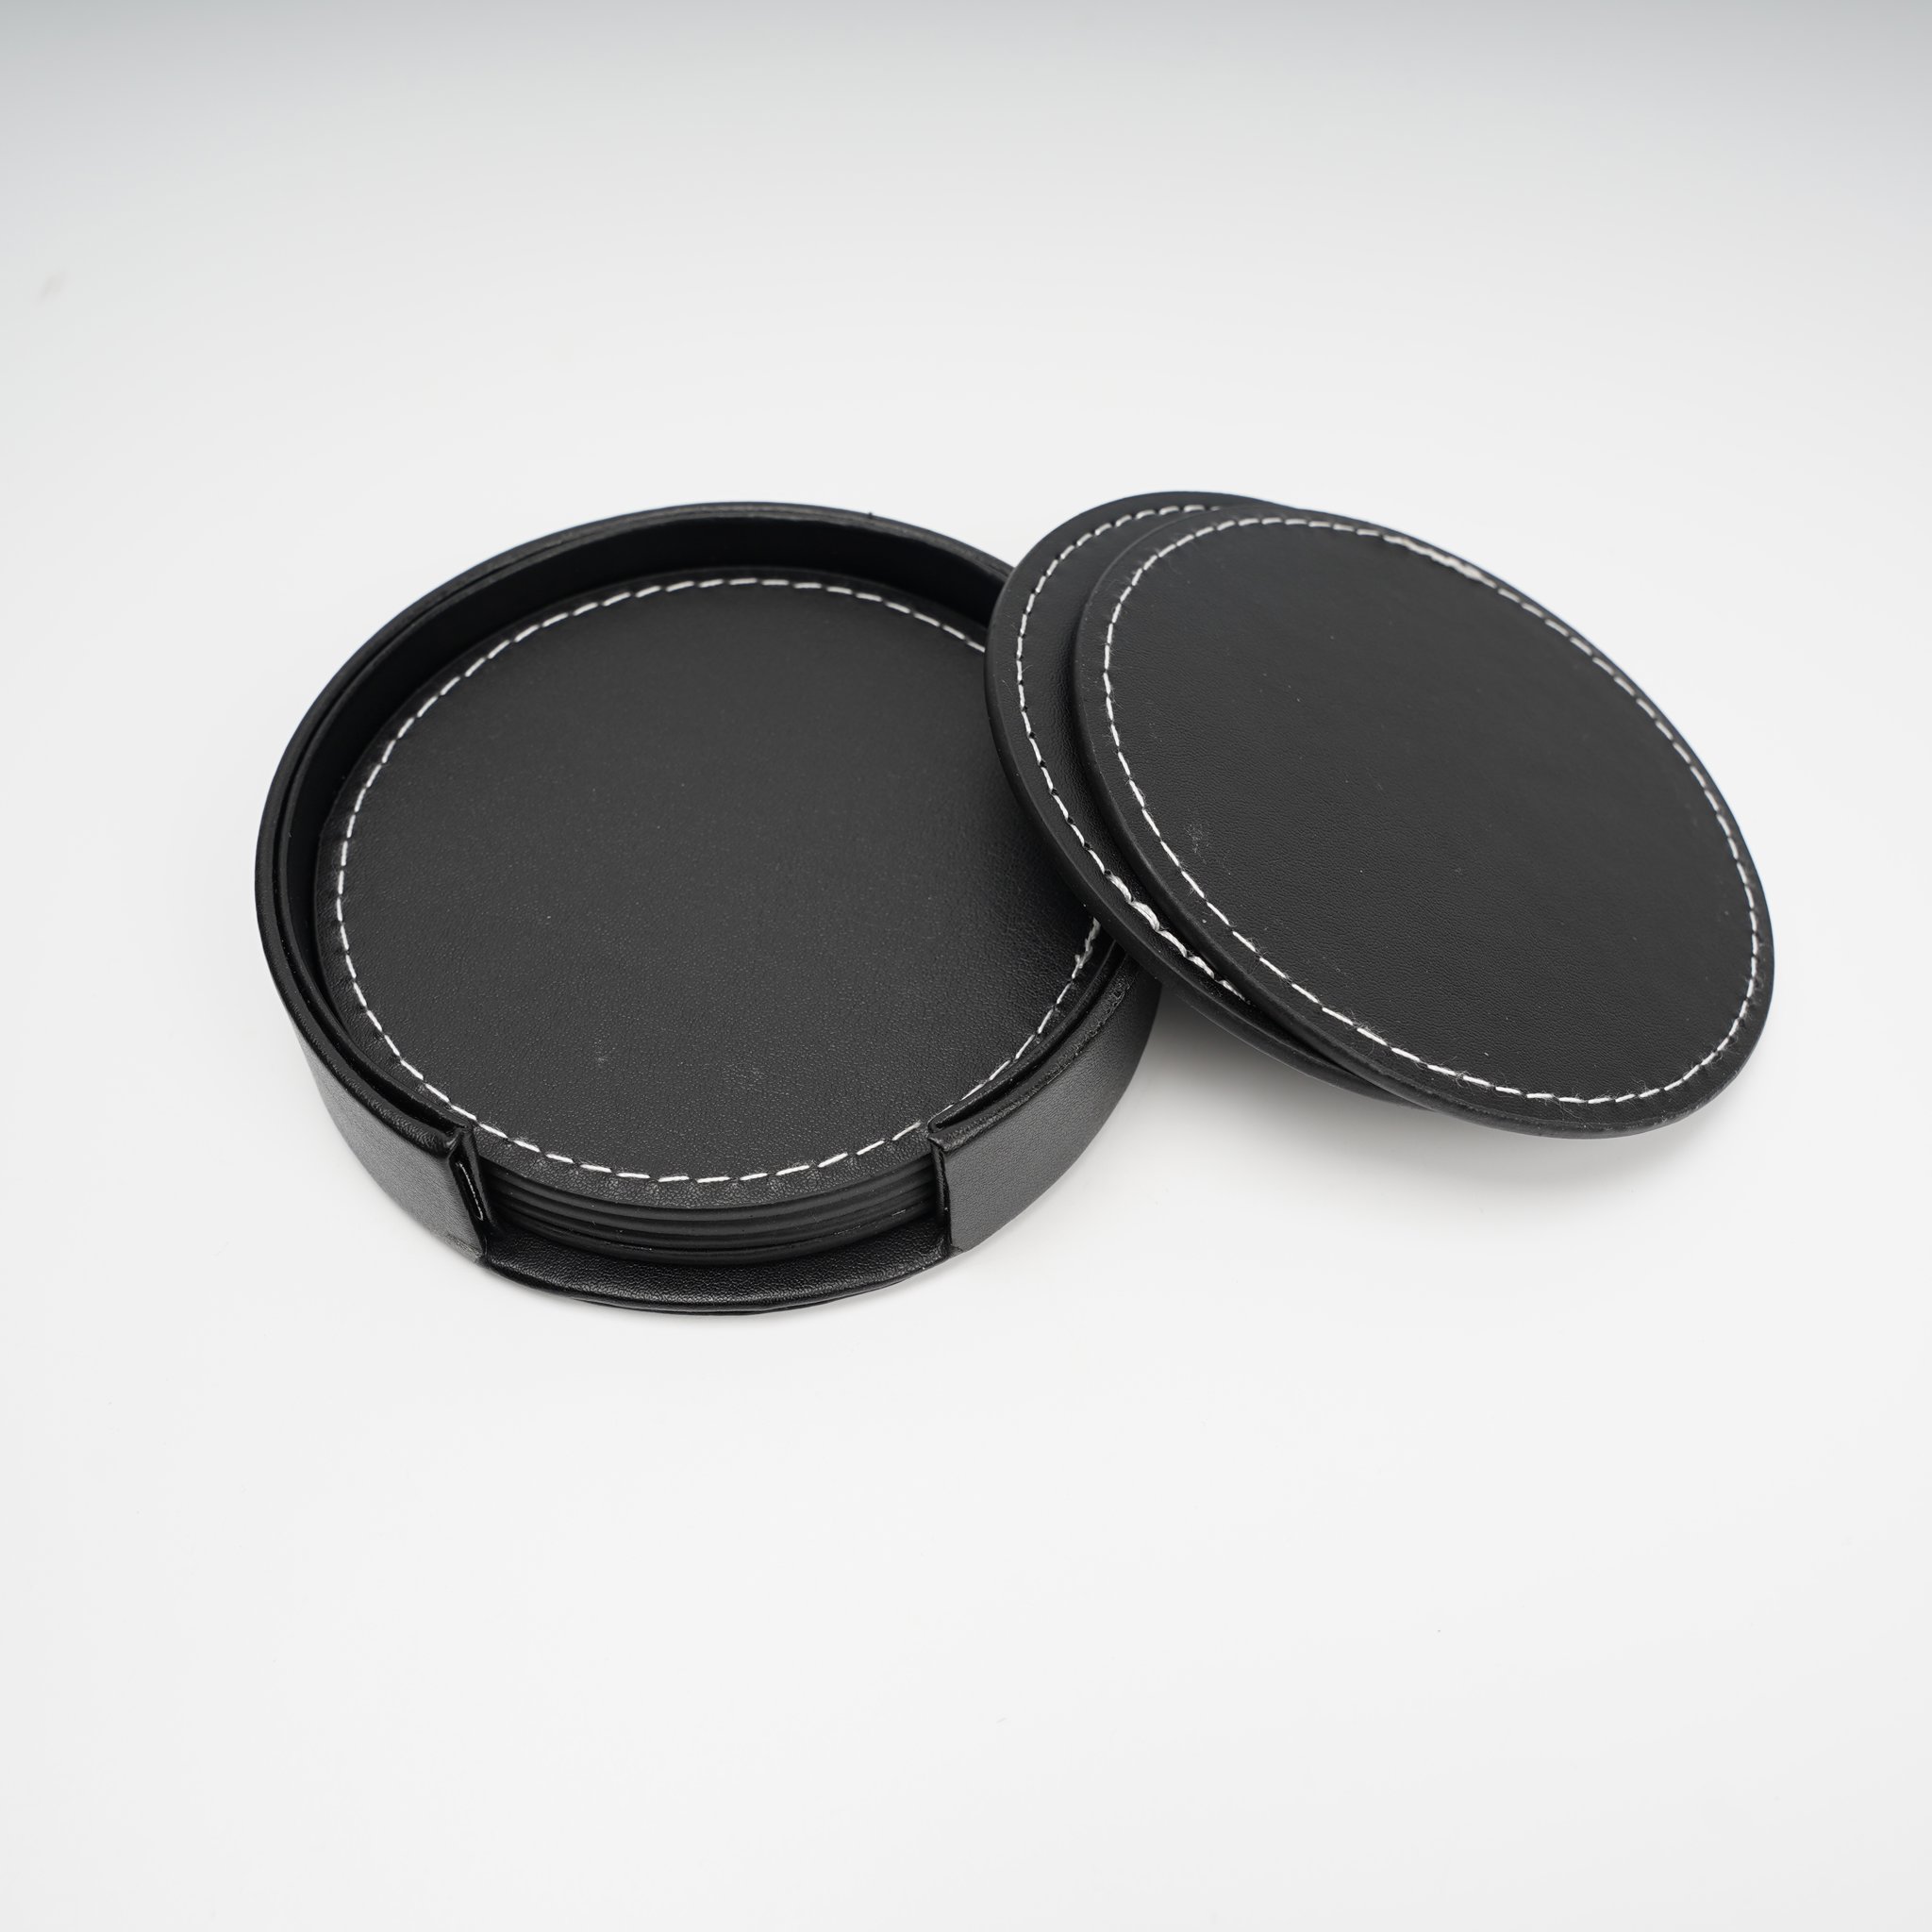 PU Leather Coasters Set With Holder3